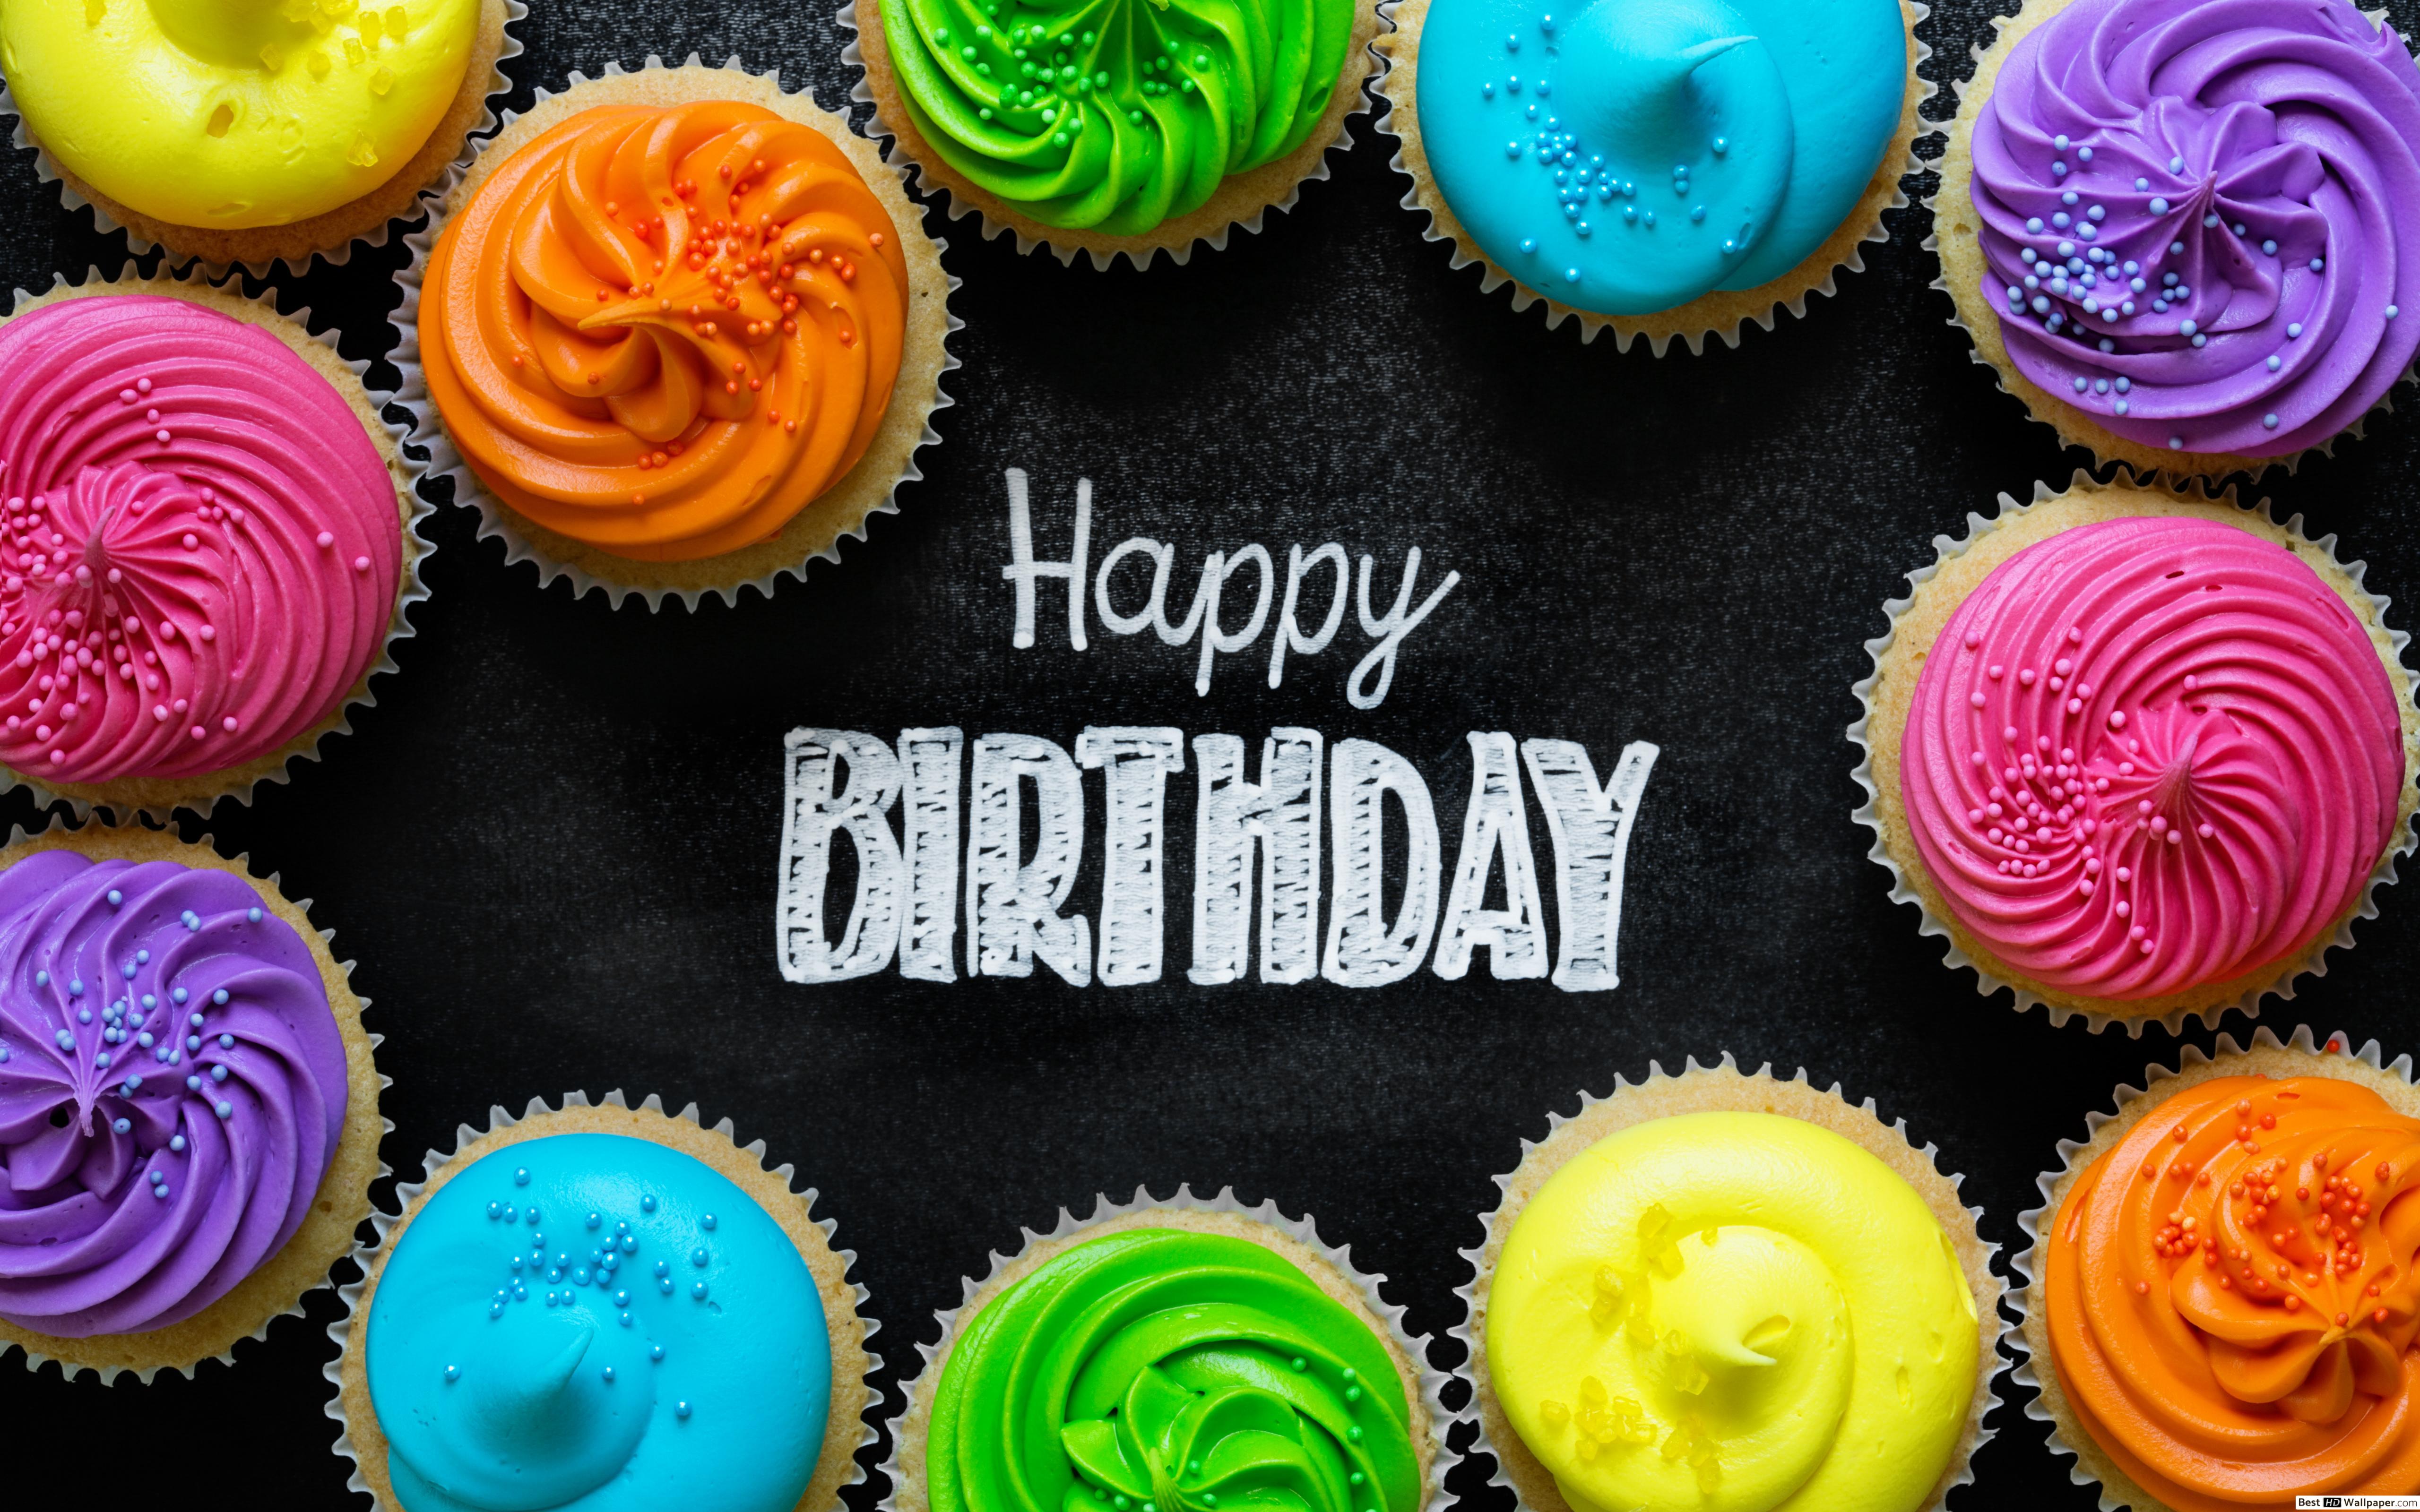 Happy Birthday Colorful Cakes - HD Wallpaper 